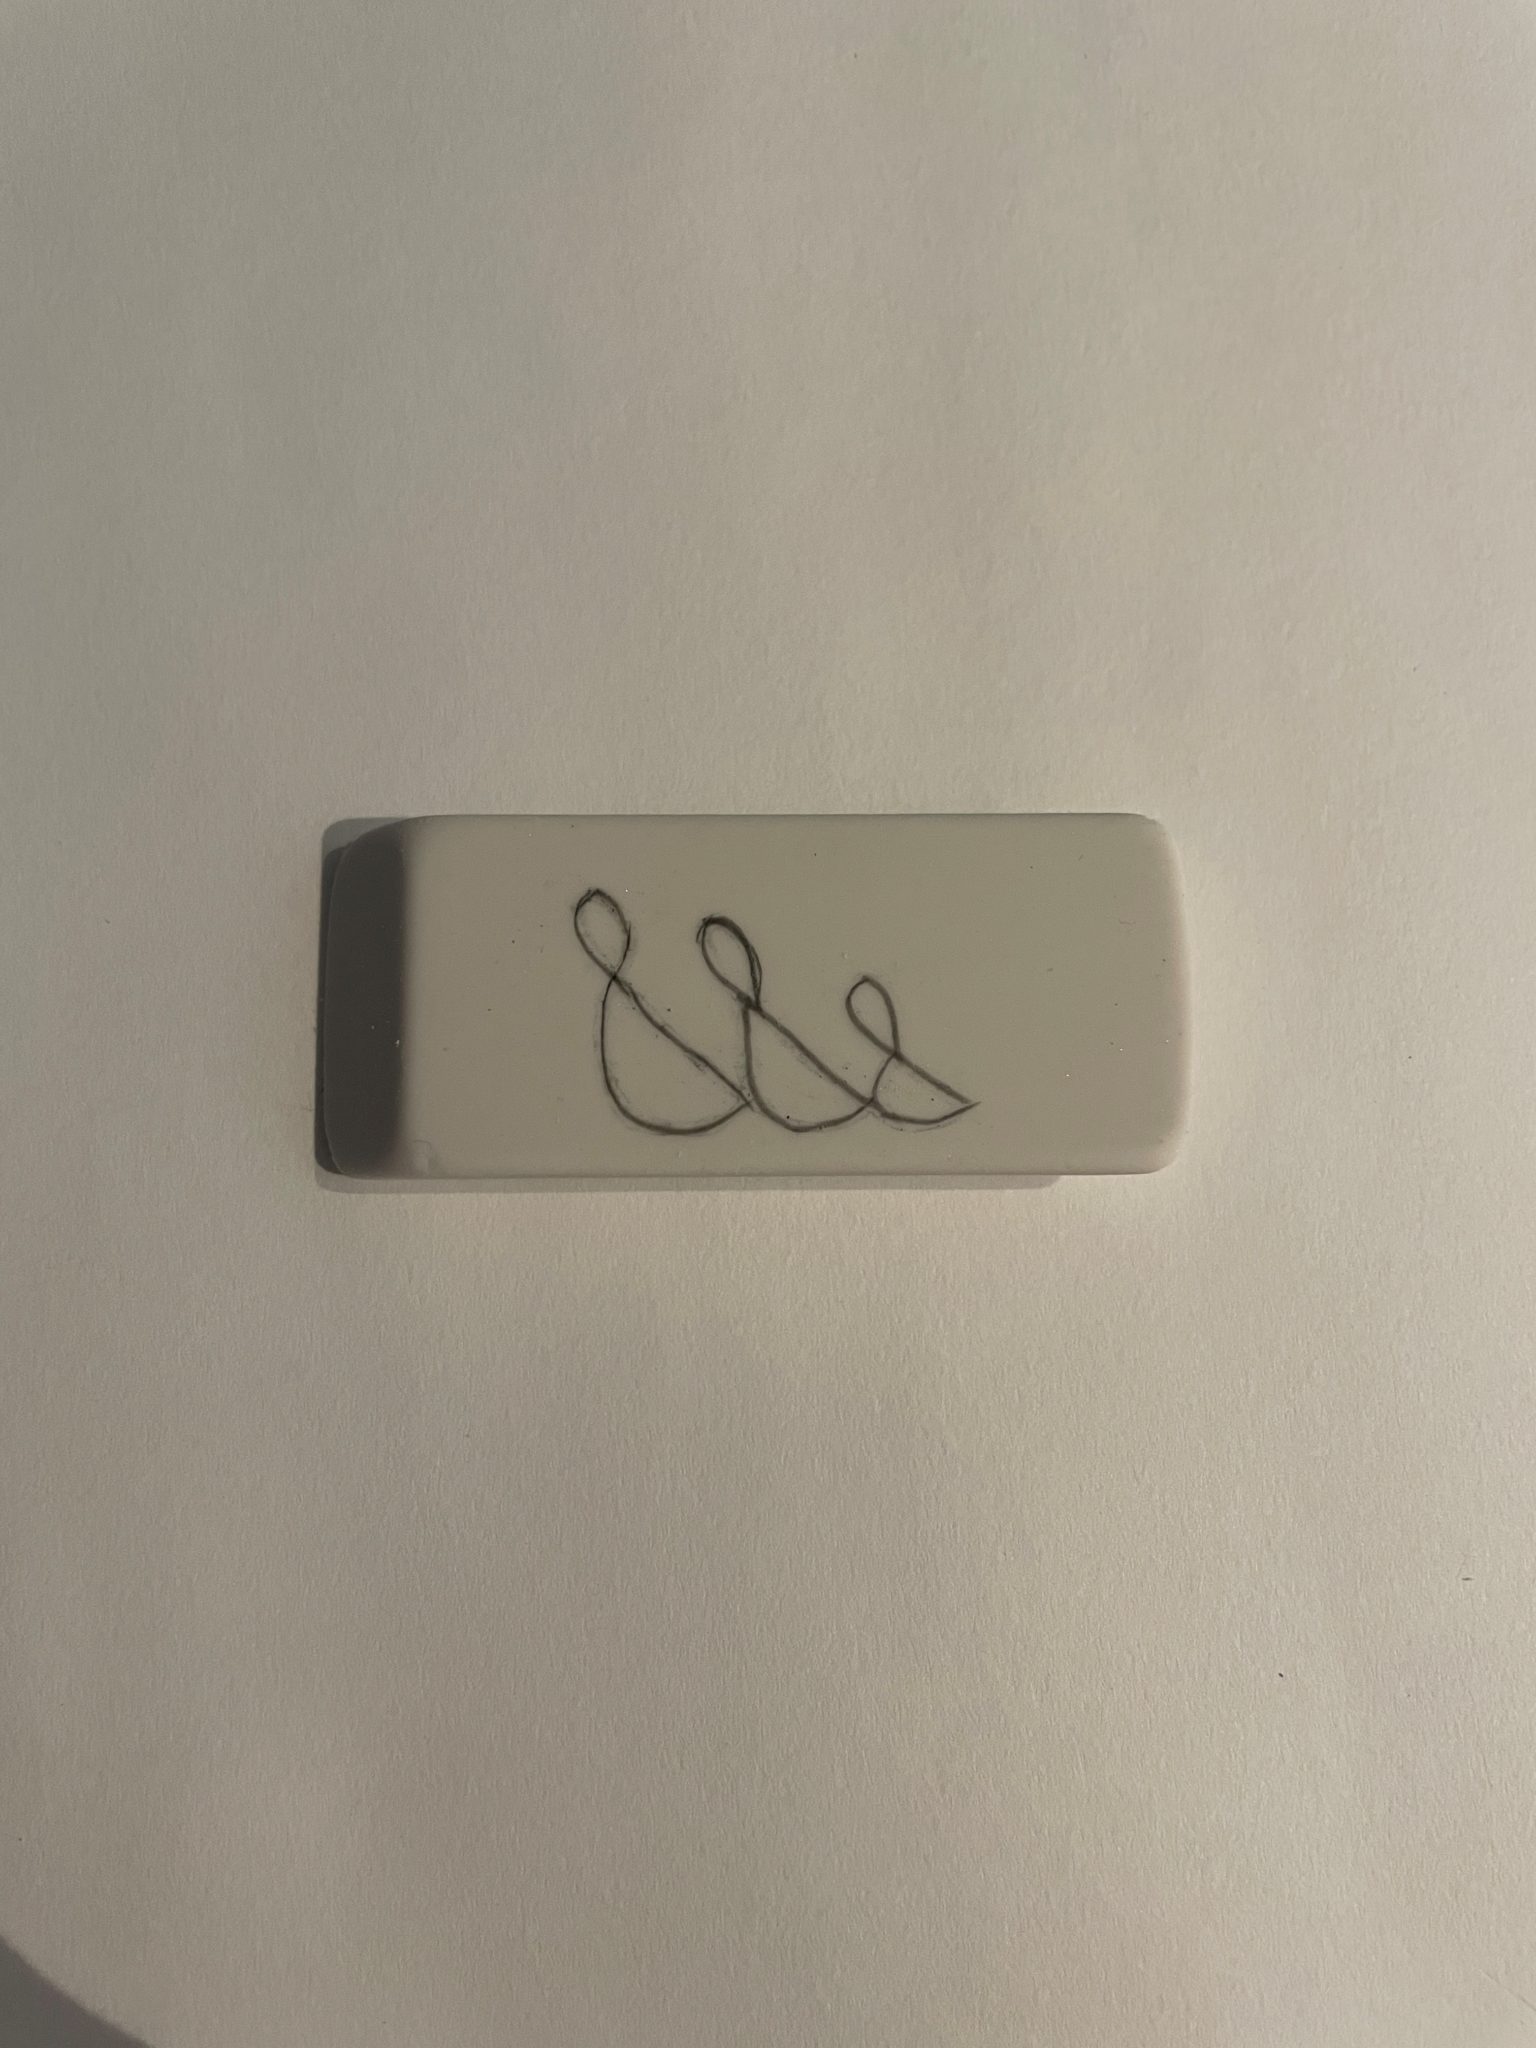 Close-up of a white rectangular eraser with an abstracted design marked in the center of the eraser with pencil. The abstracted design looks like three connected geese bodies and heads arranged by size with the largest goose body/head appearing on the left and the smallest goose body/head on the right. 